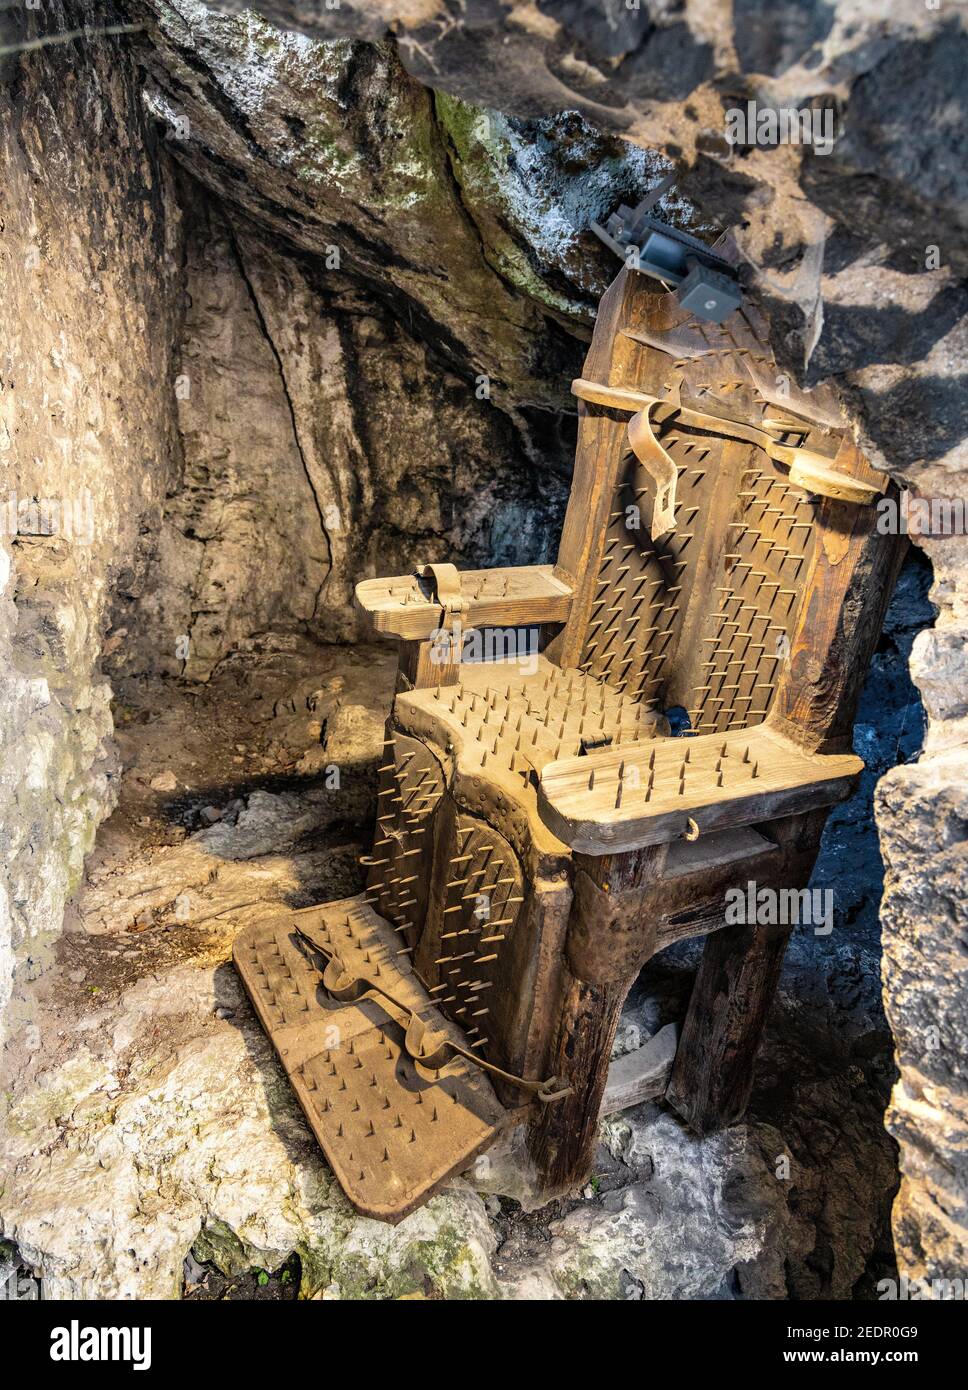 Podzamcze, Poland - August 25, 2020: Torture with chair in medieval Ogrodzieniec Castle, part of Eagles’ Nests Trail at Cracow-Czestochowa upland in S Stock Photo